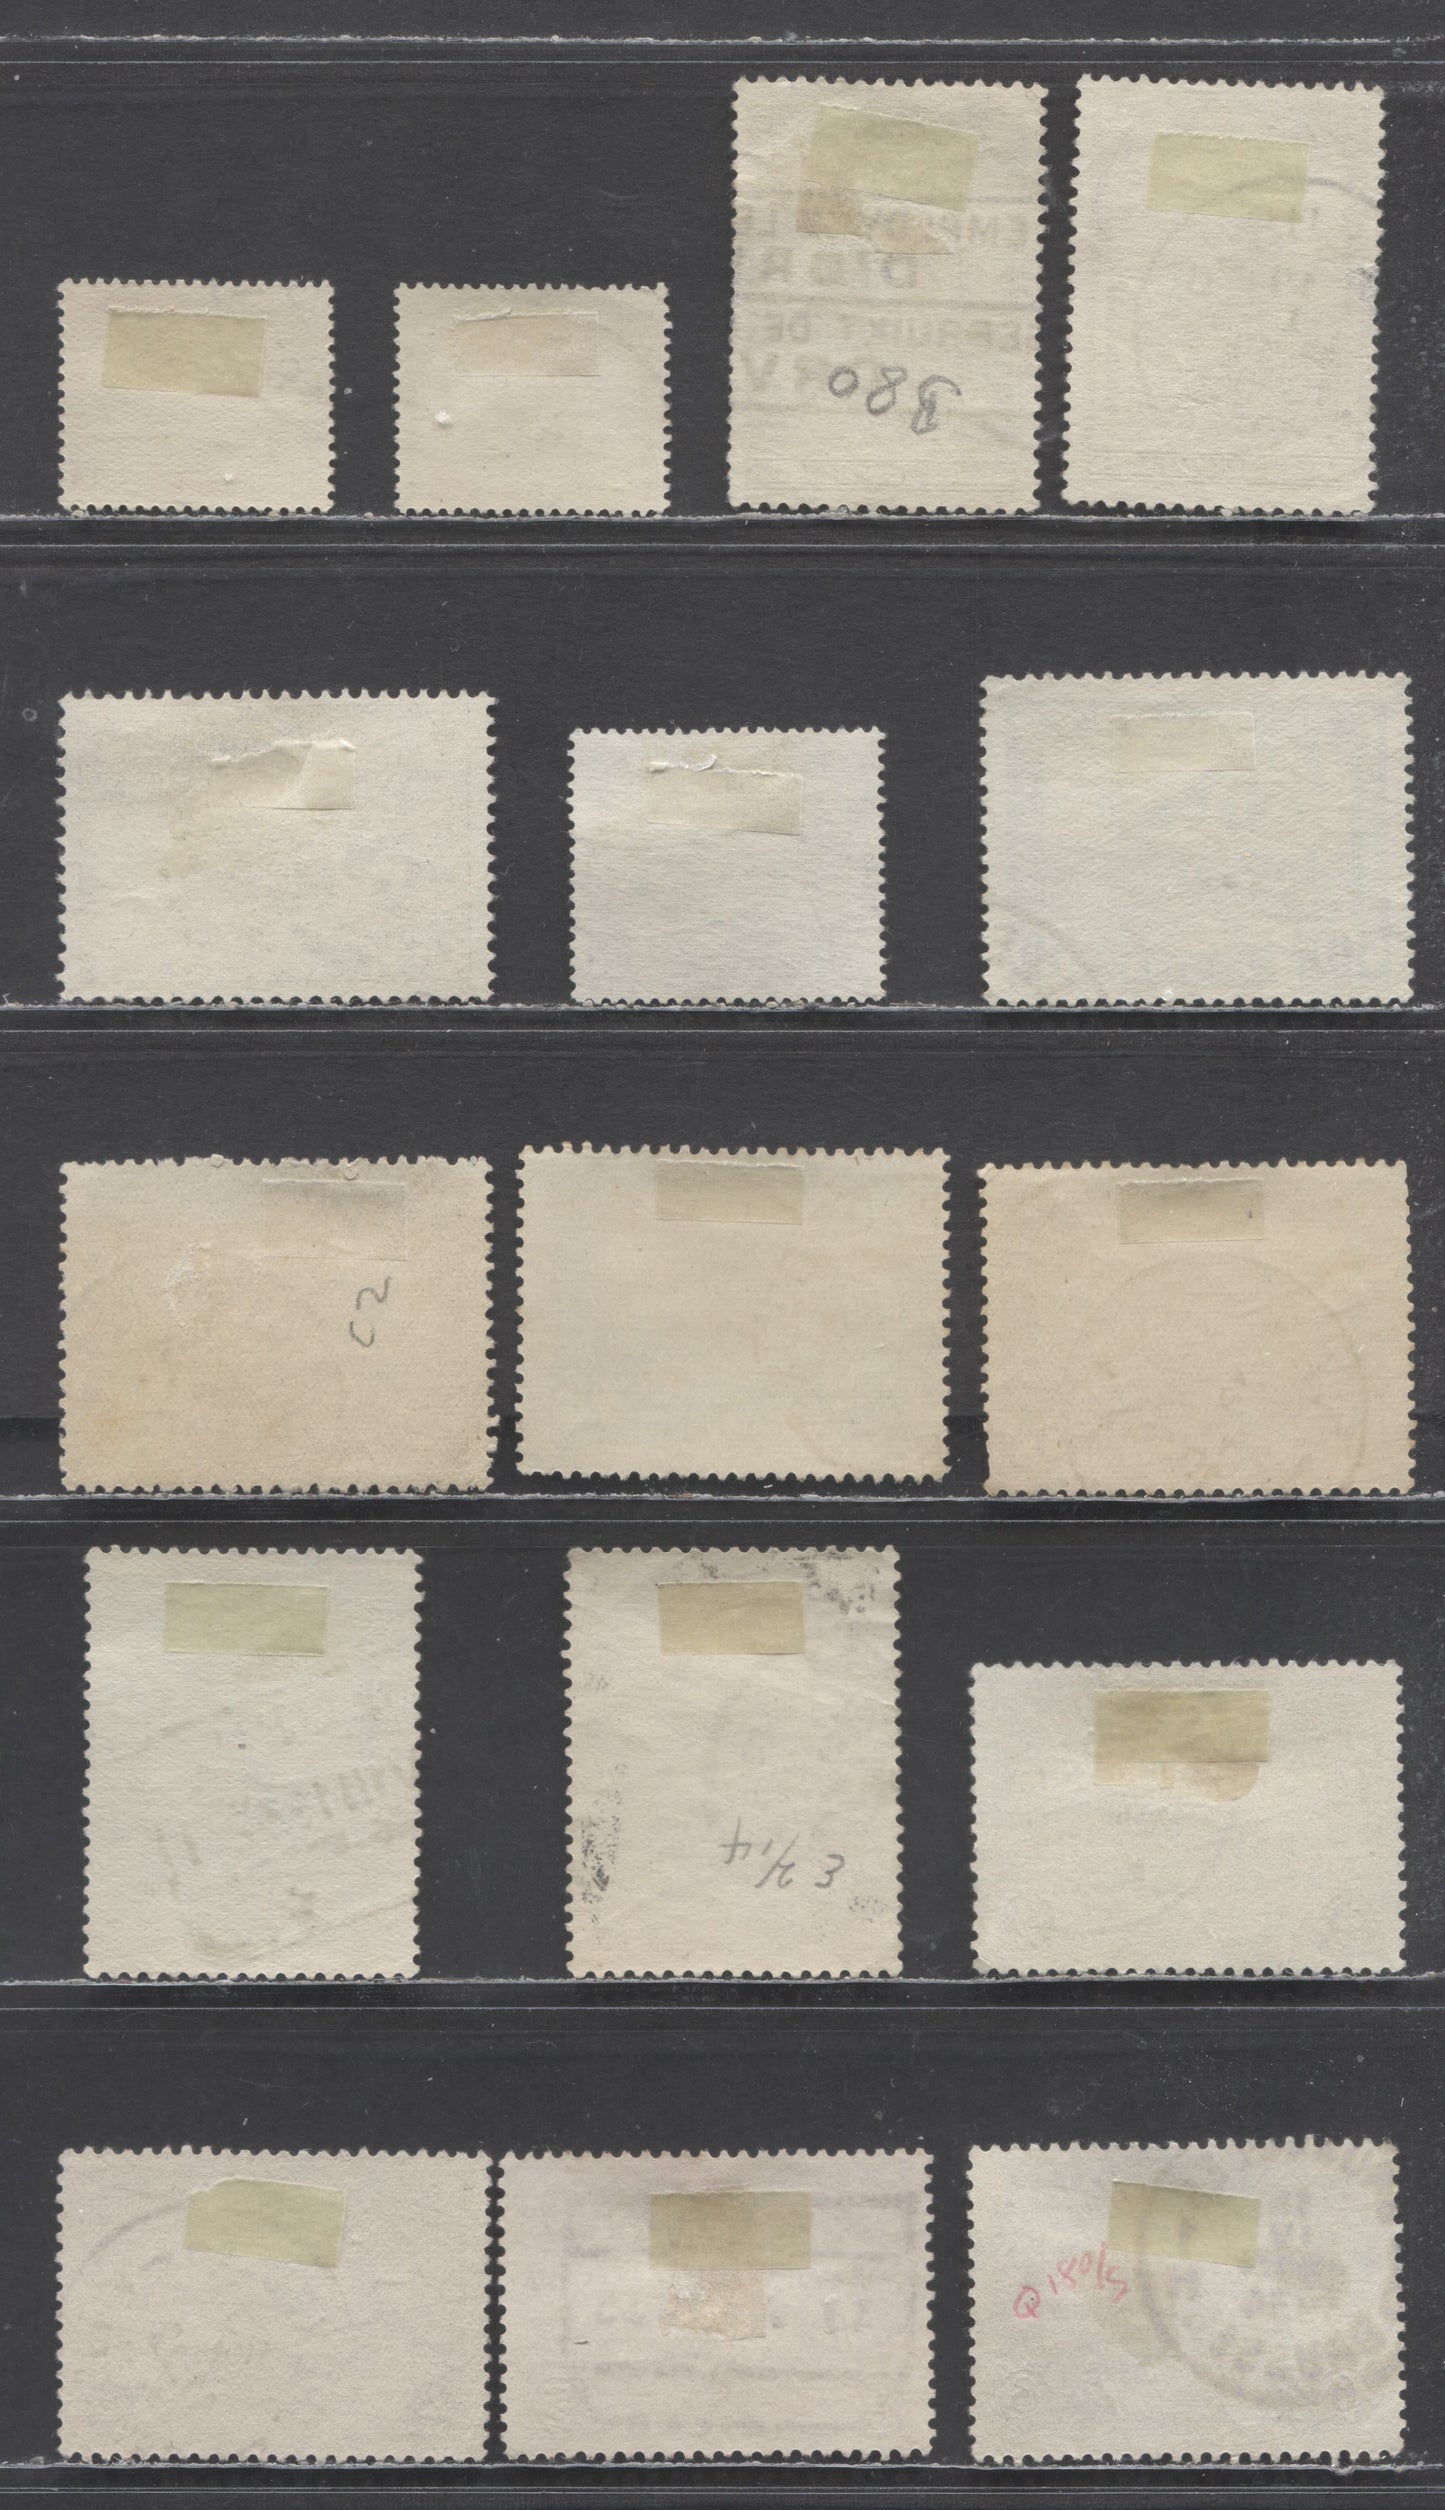 Lot 84 Belgium SC#B78/Q180 1928-1930 Semi Postal, Airmail & Special Delivery Parcel Post Issues, 16 Fine/Very Fine Used Singles, Click on Listing to See ALL Pictures, Estimated Value $6